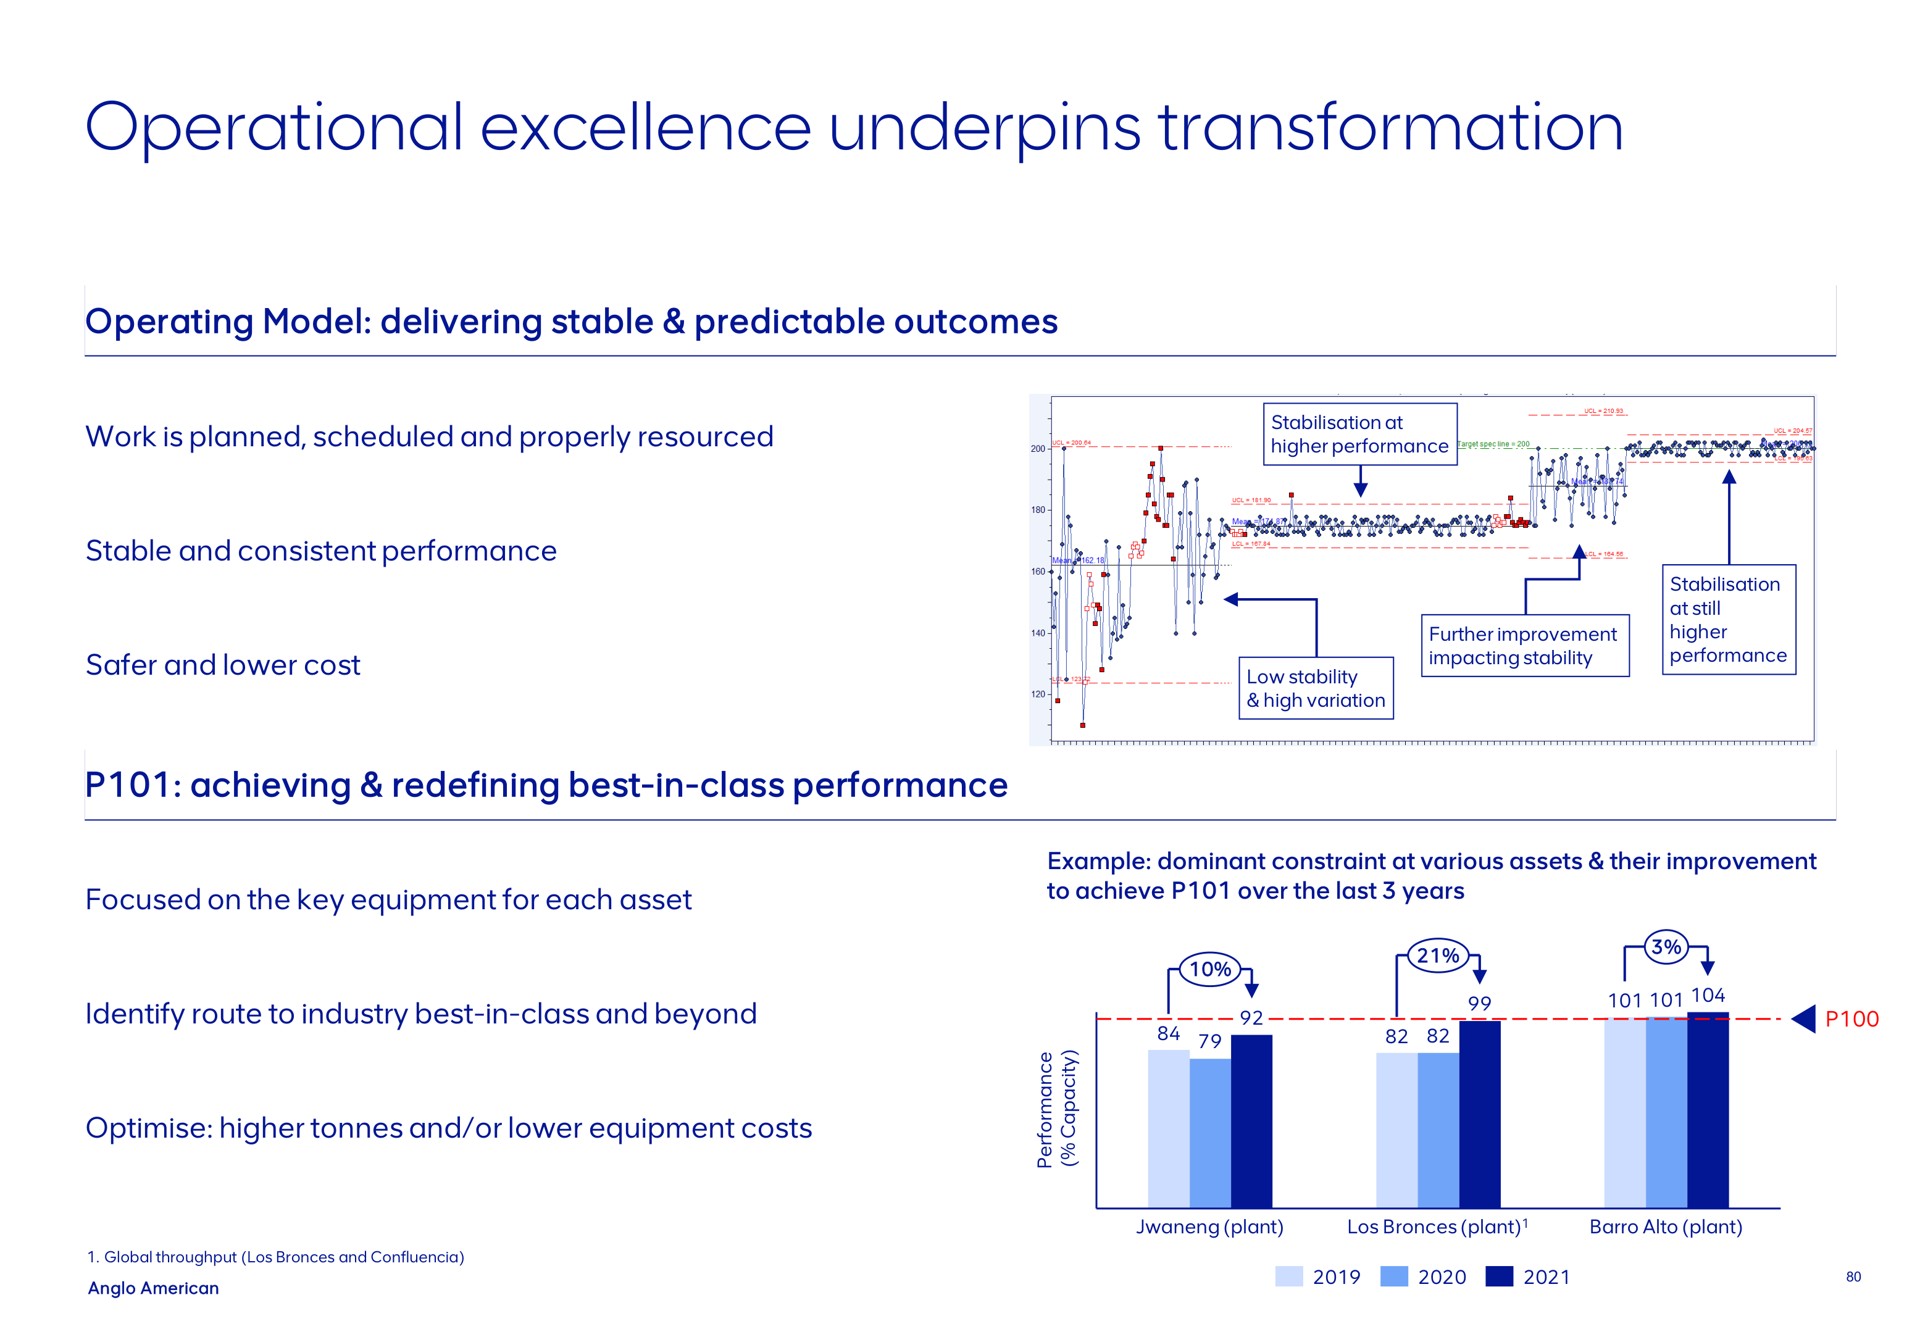 operational excellence underpins transformation | AngloAmerican